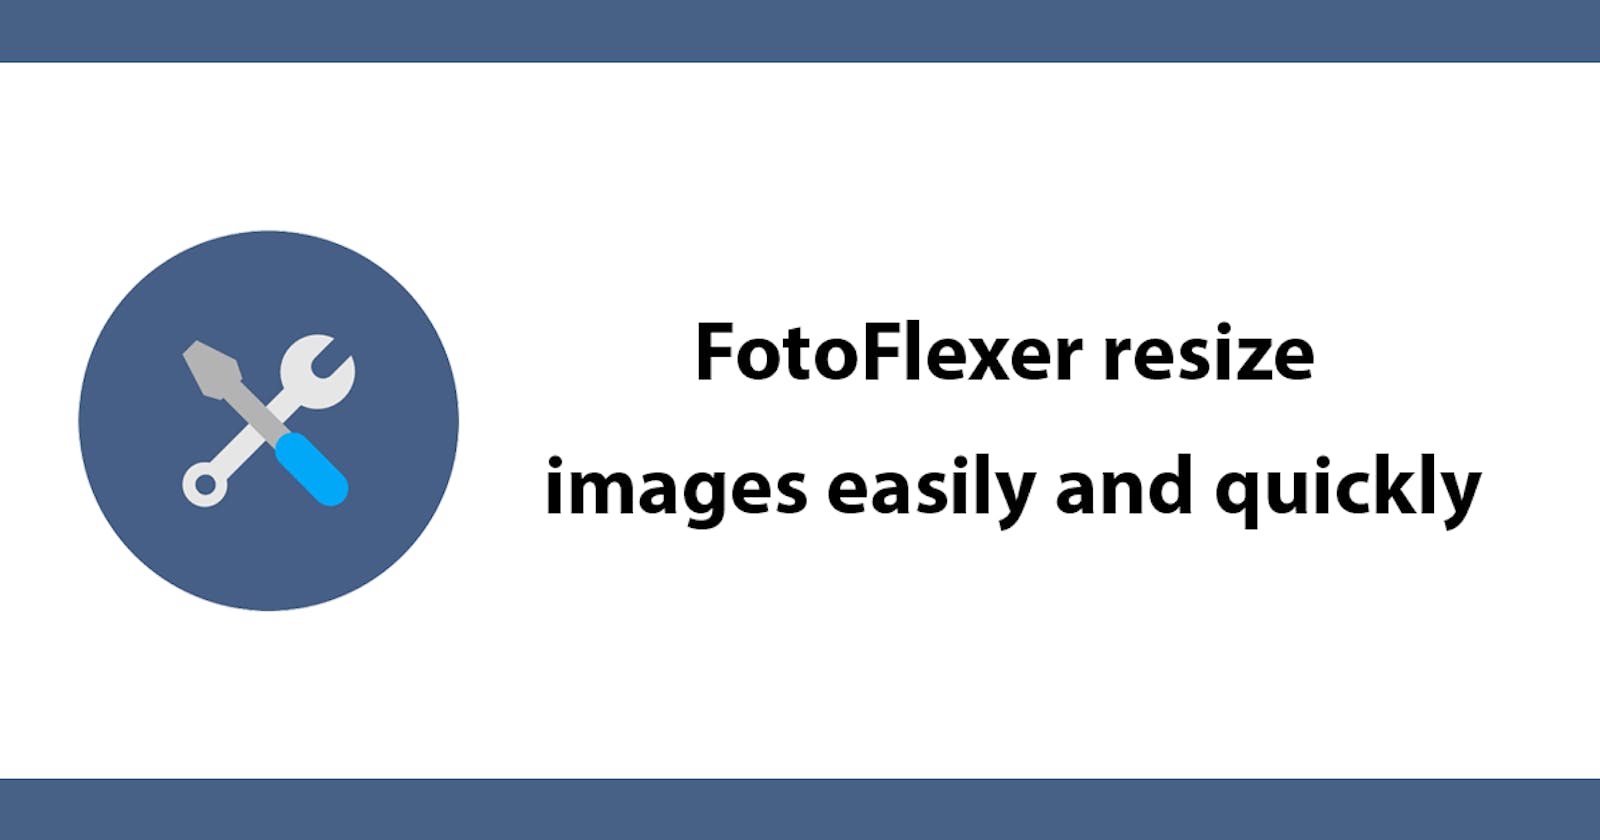 FotoFlexer resize images easily and quickly